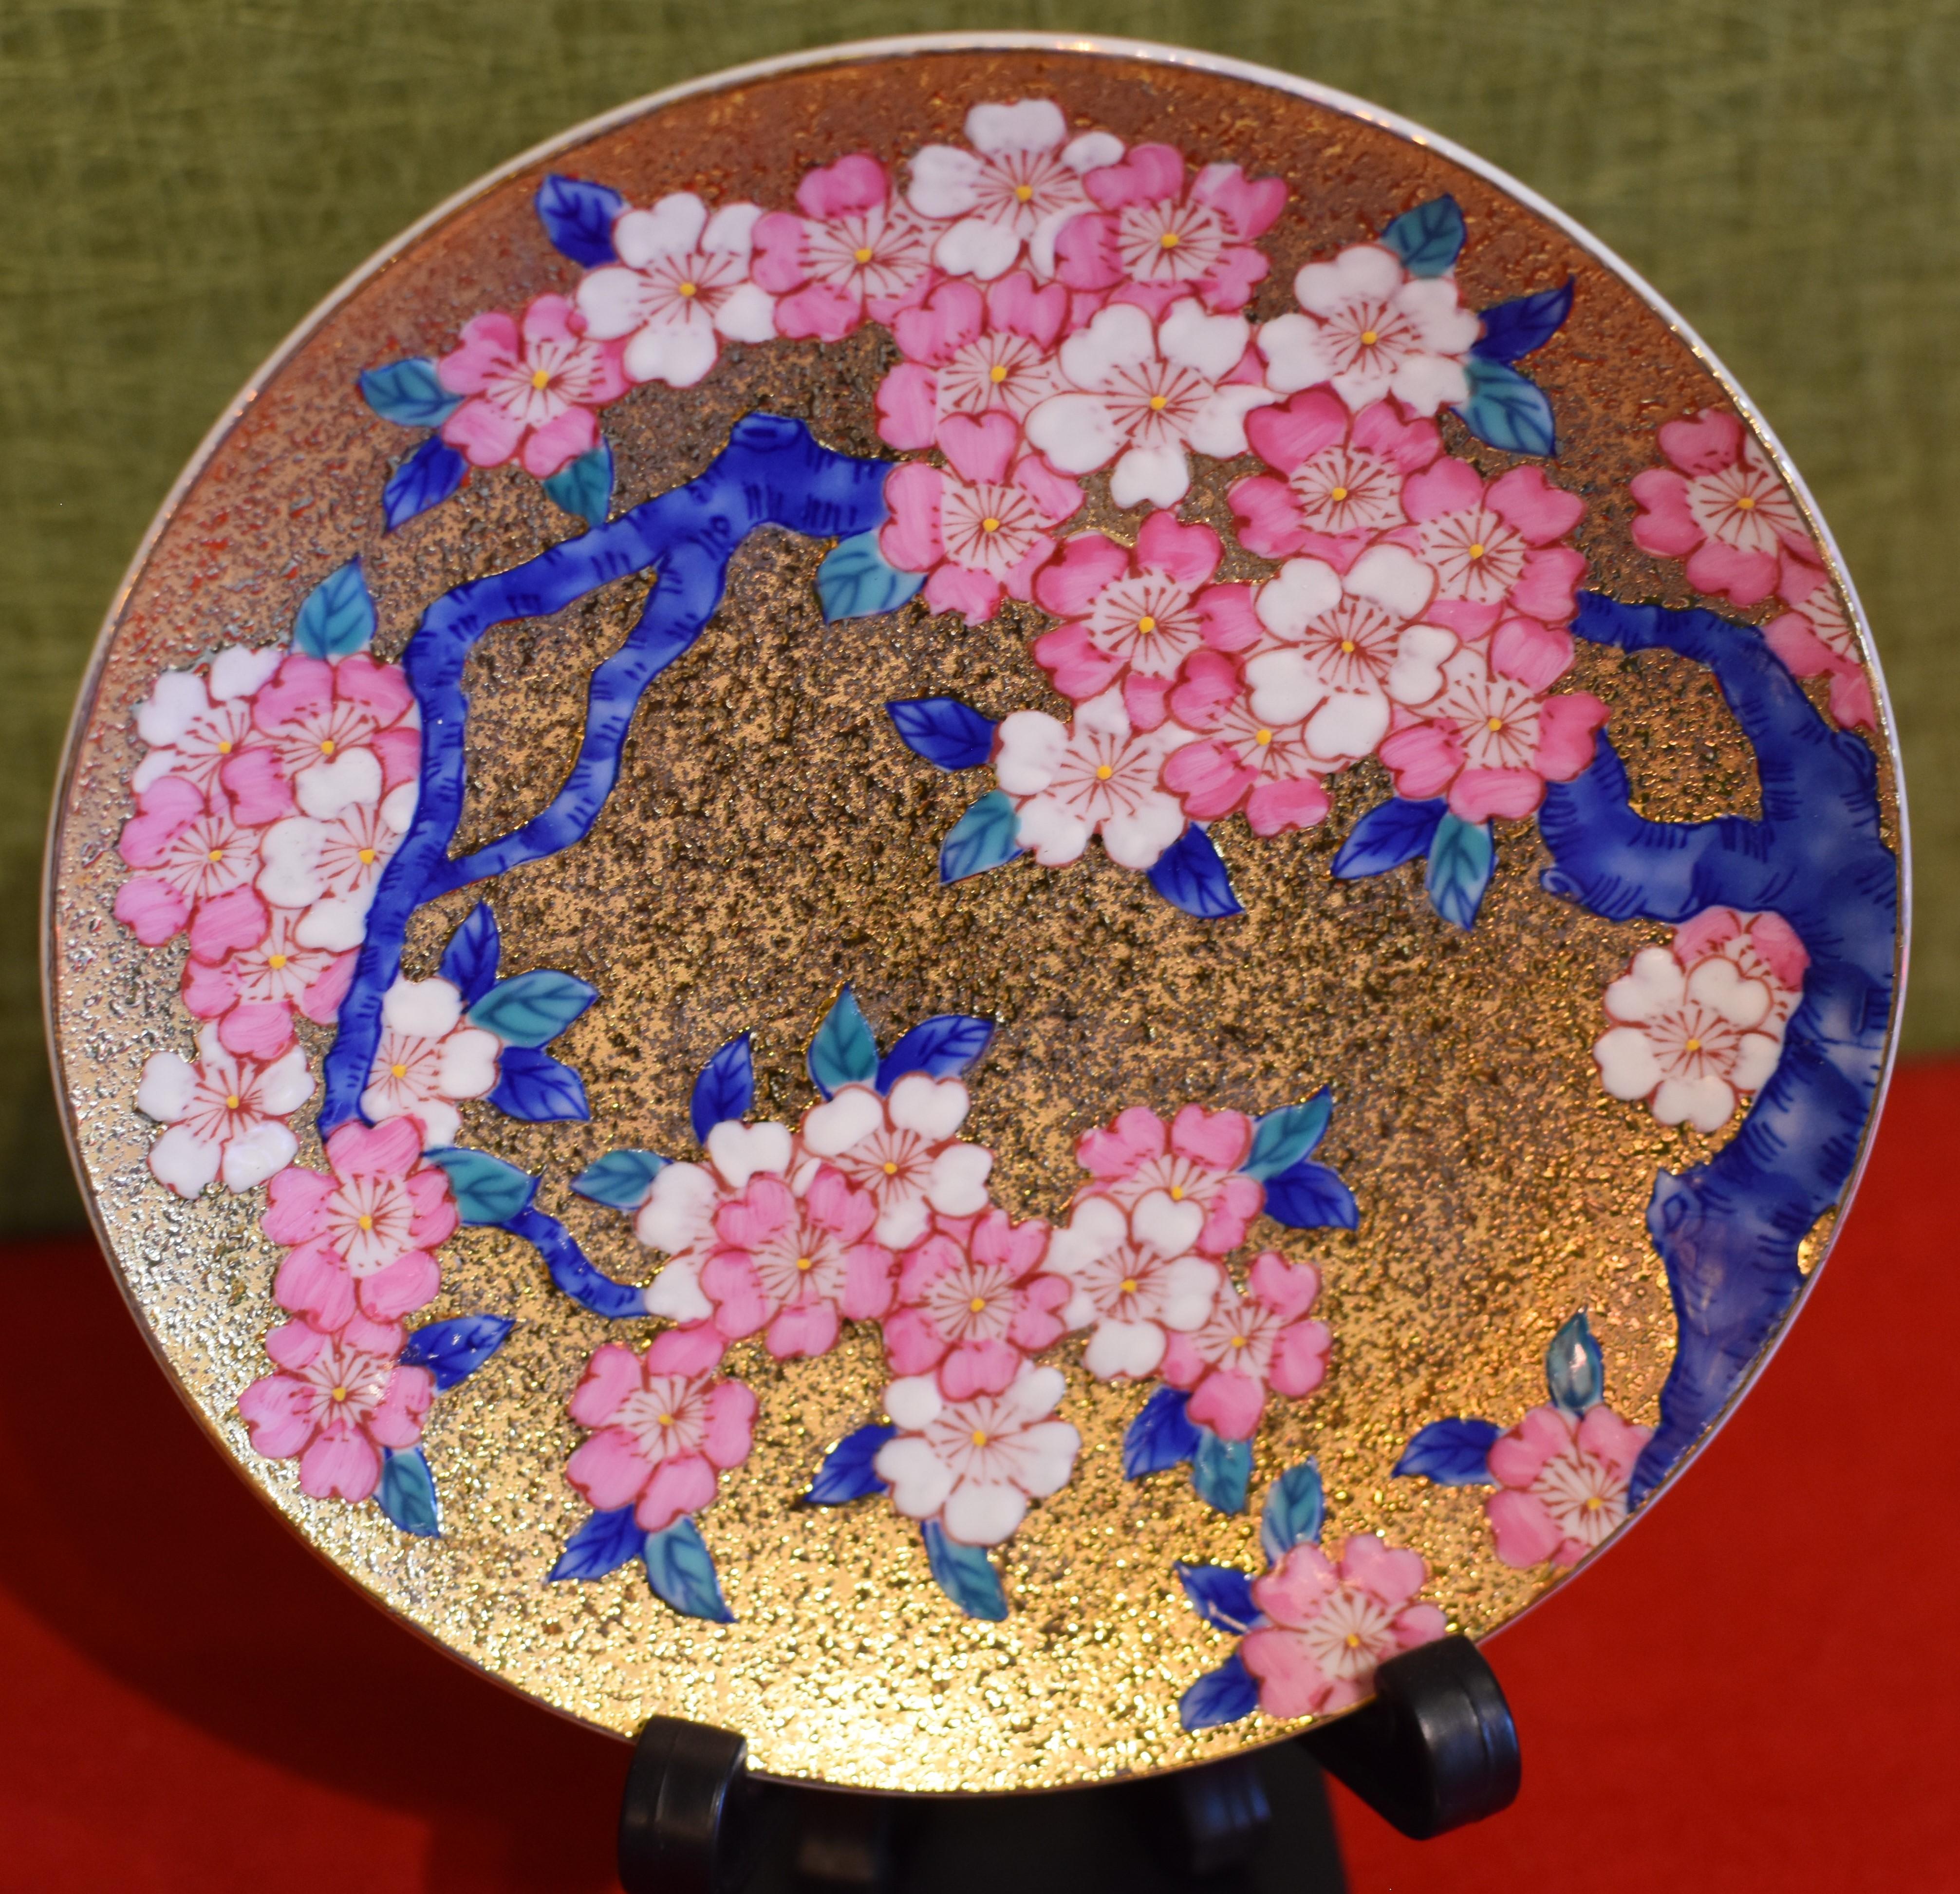 Contemporary gilded signed porcelain cup and saucer, intricately hand-painted in vivid blue, pink and white on an attractive gilded body, featuring auspicious cherry blossoms. This cup and saucer are from a signature series by a highly acclaimed